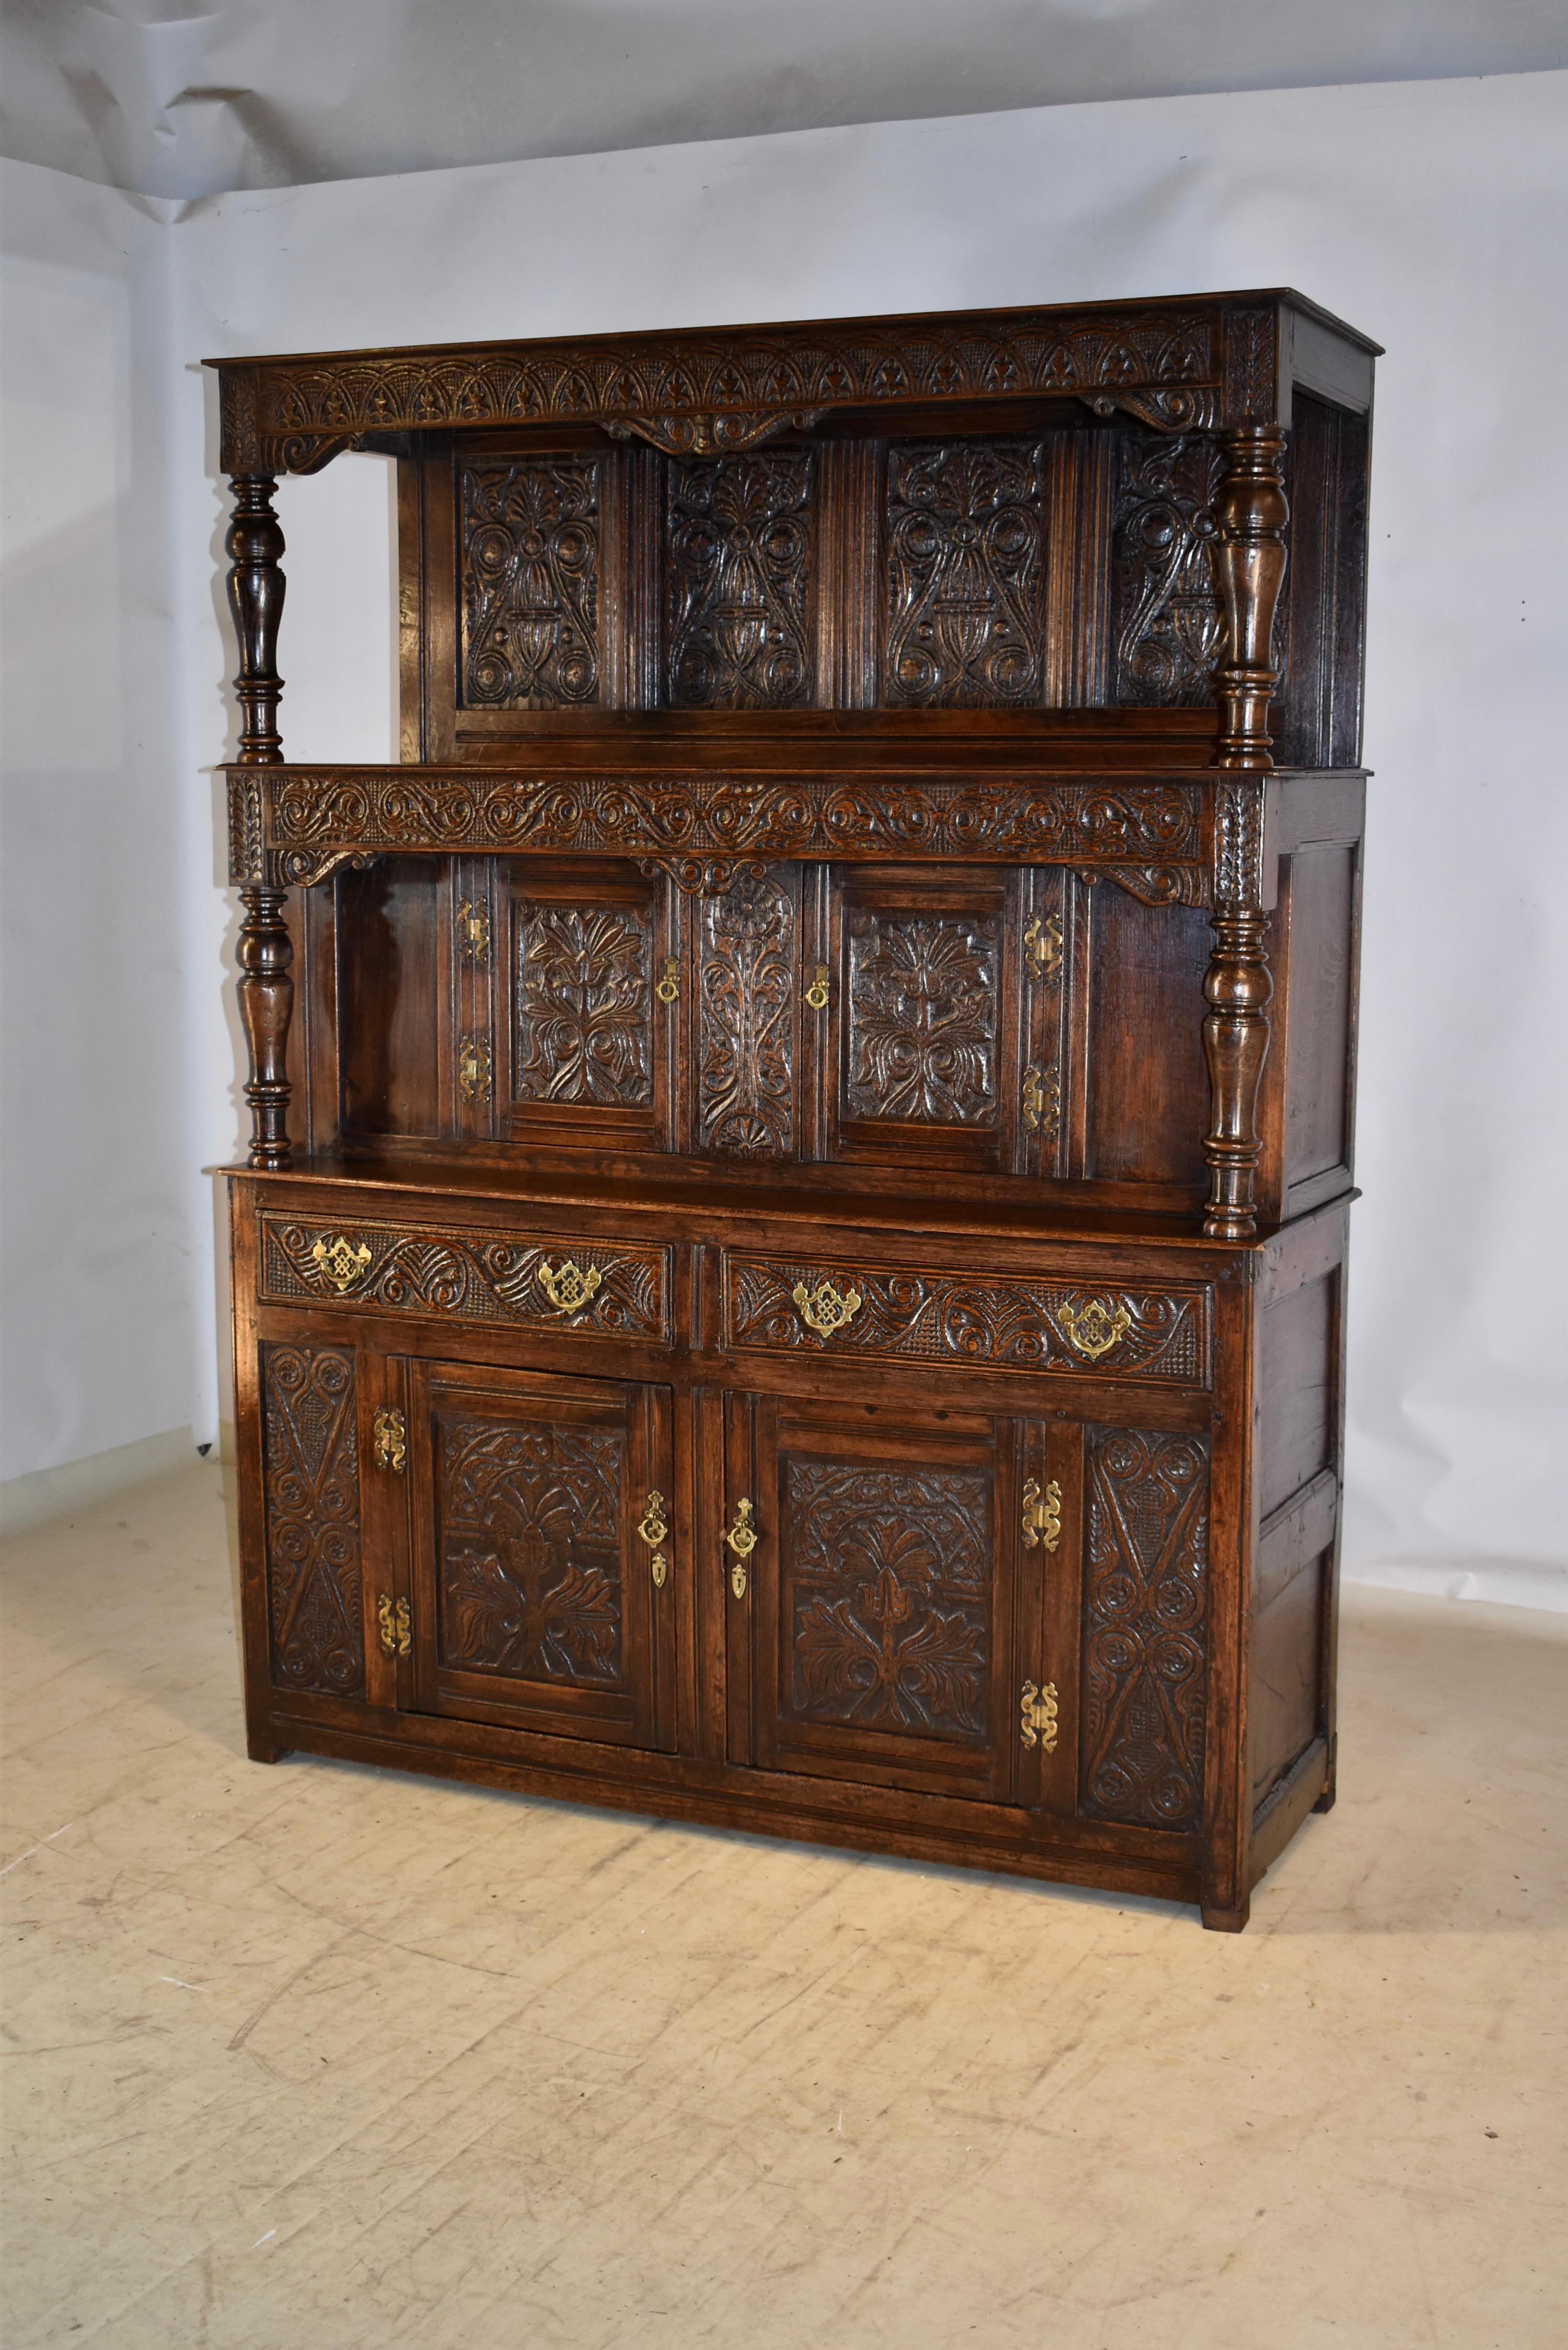 Early 18th Century English Tridarn Press Cupboard In Good Condition For Sale In High Point, NC